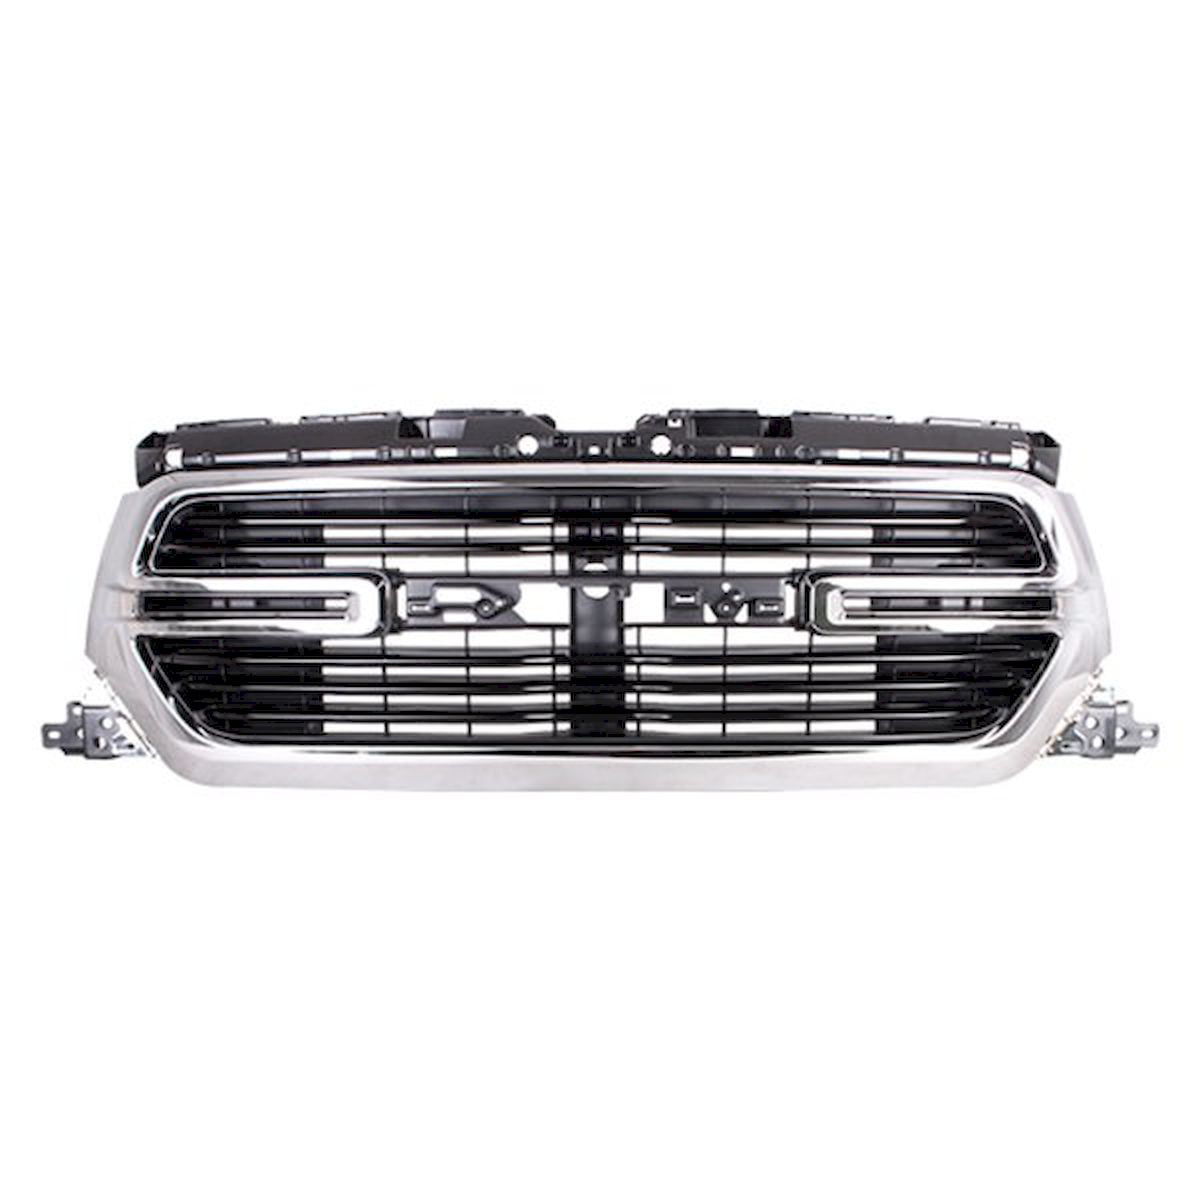 OE Compatible/Replacement Grille Chrome Surround With Black